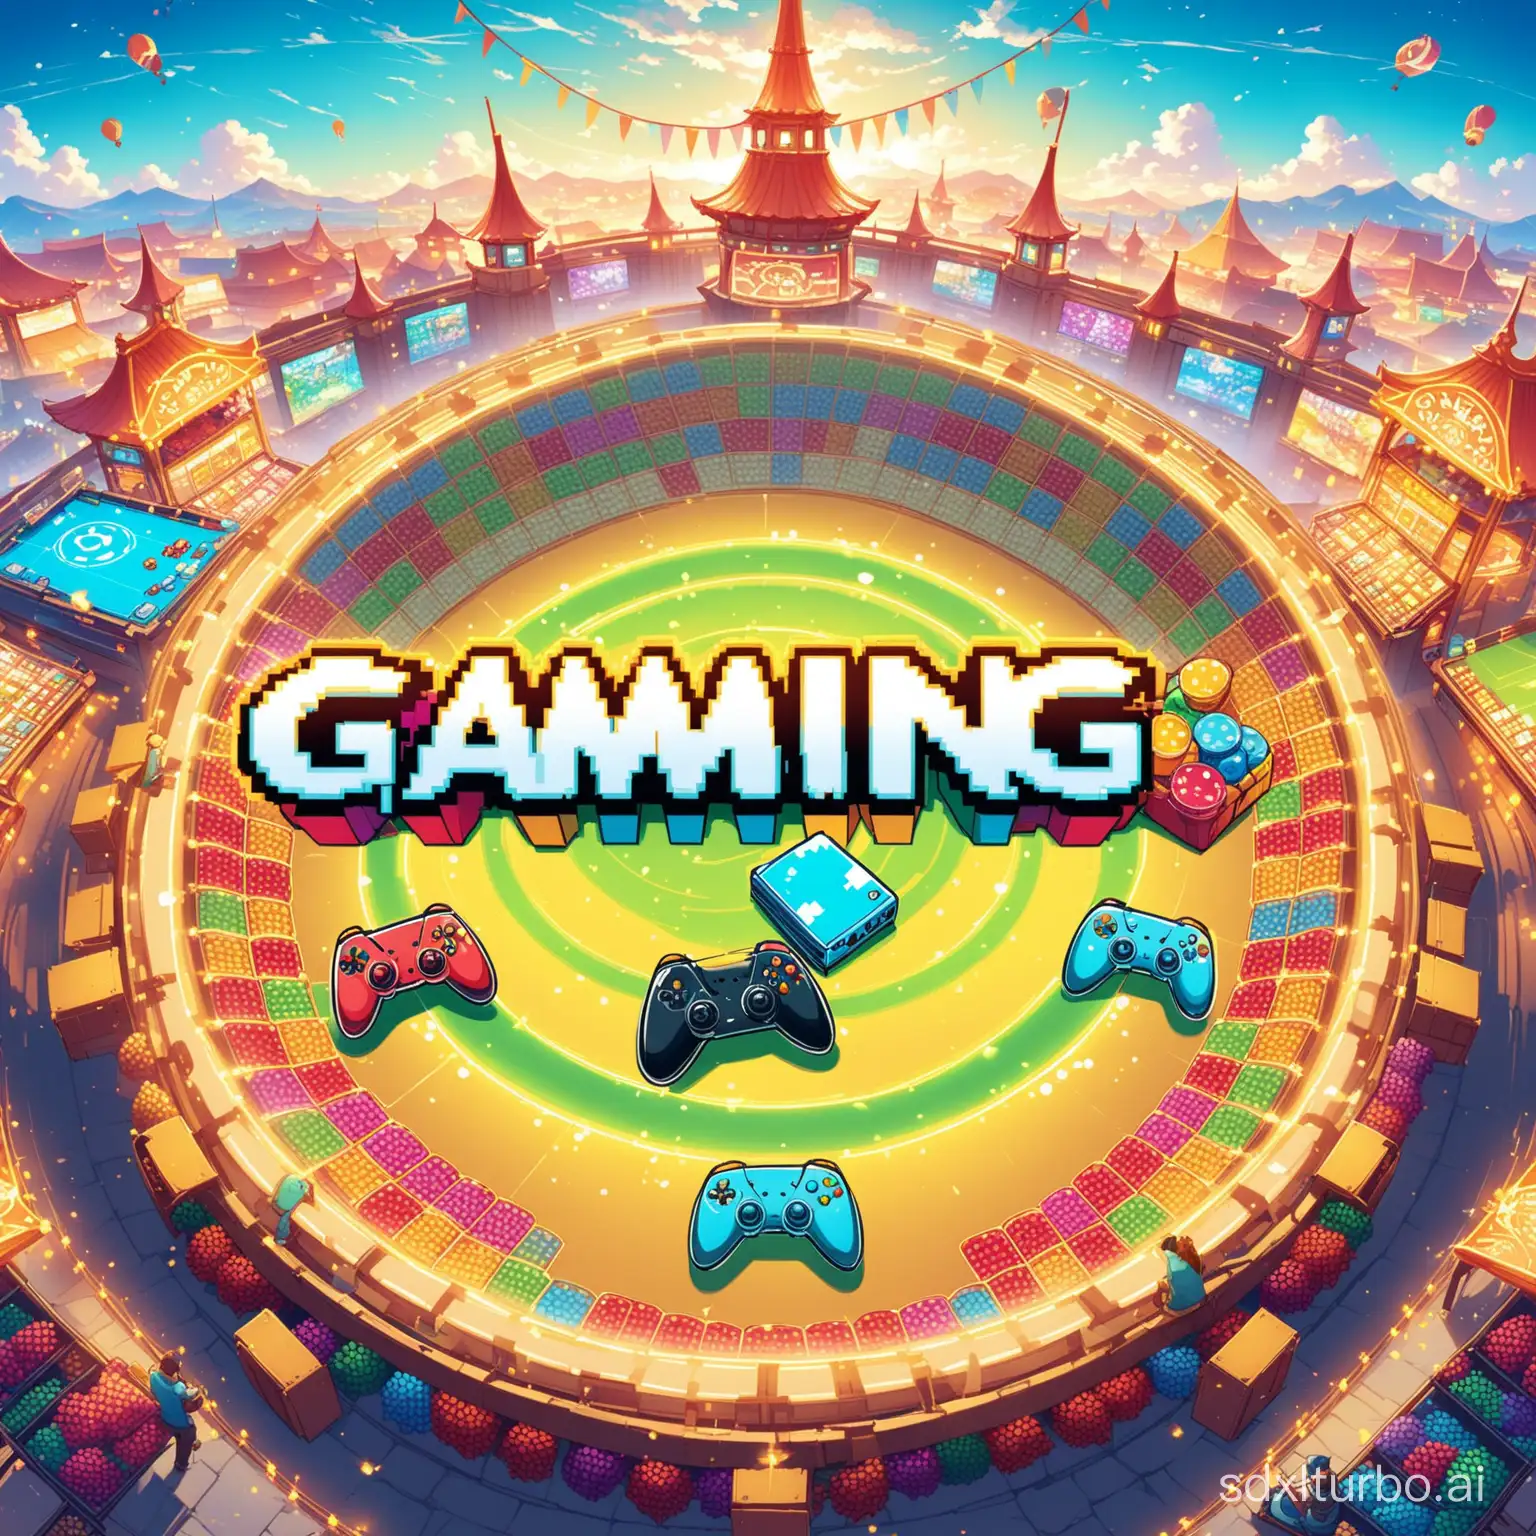 Gaming industry, market, overview